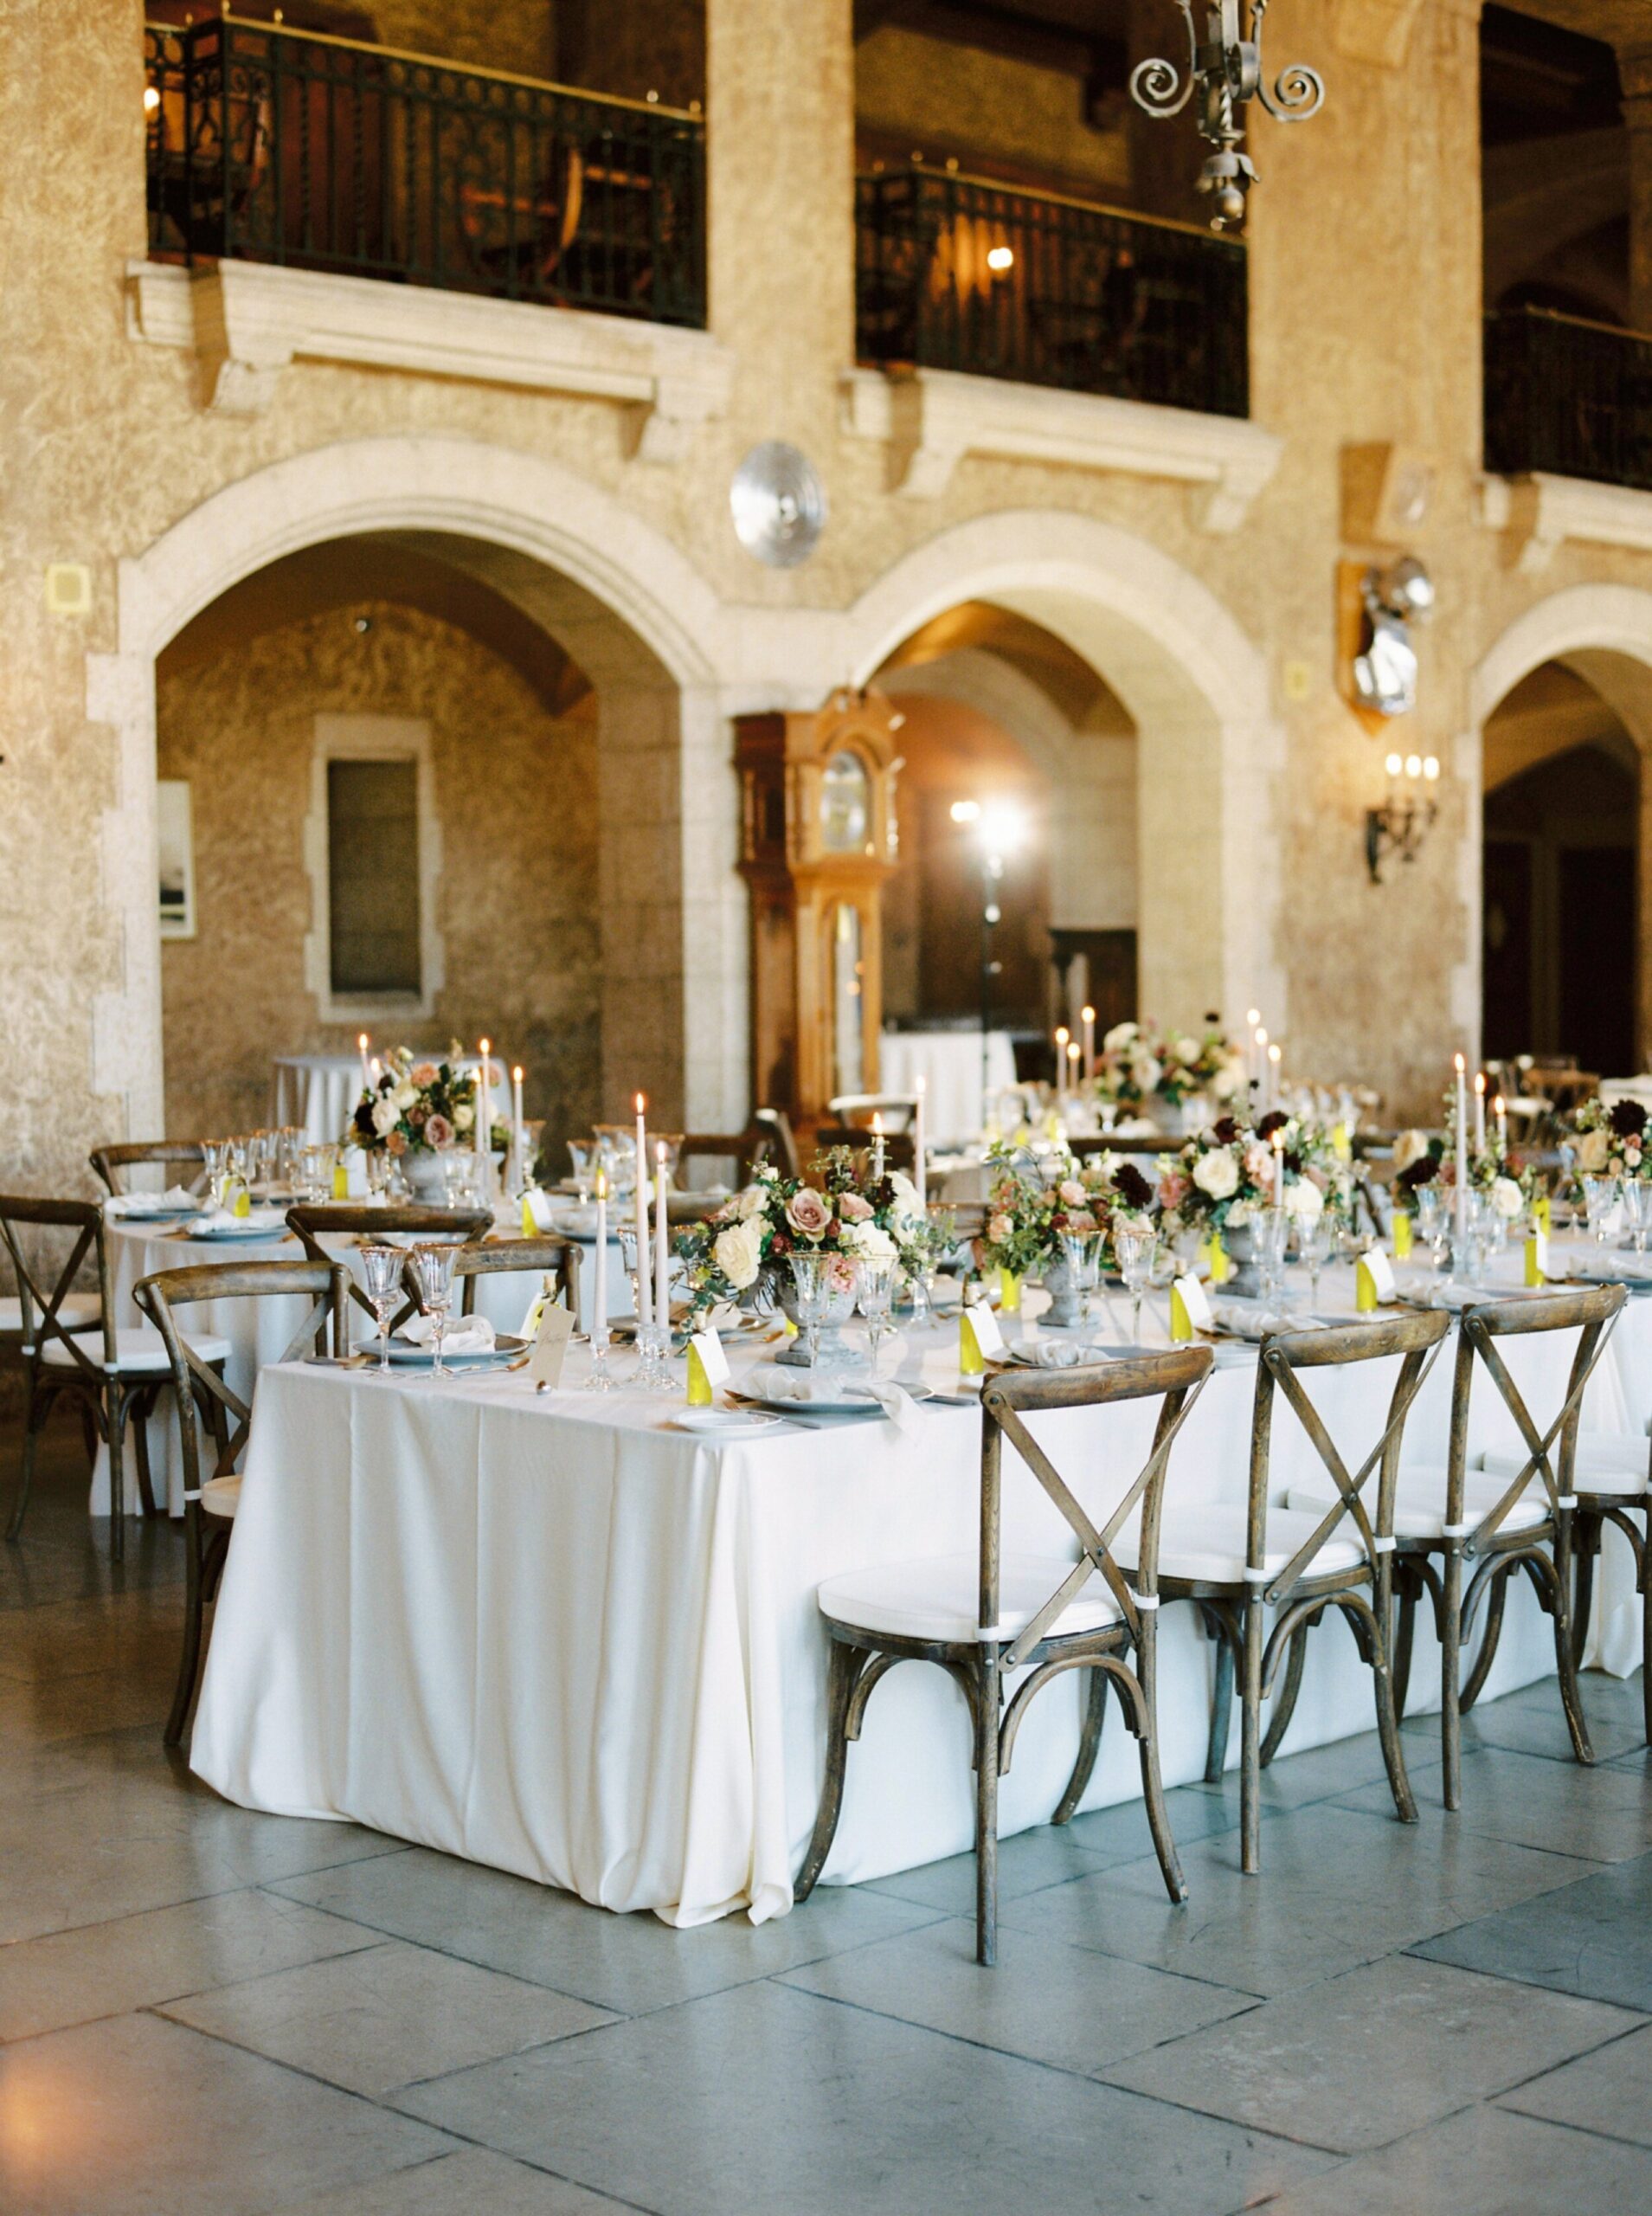  Italian themed wedding at the banff springs hotel in the mt stephen hall 